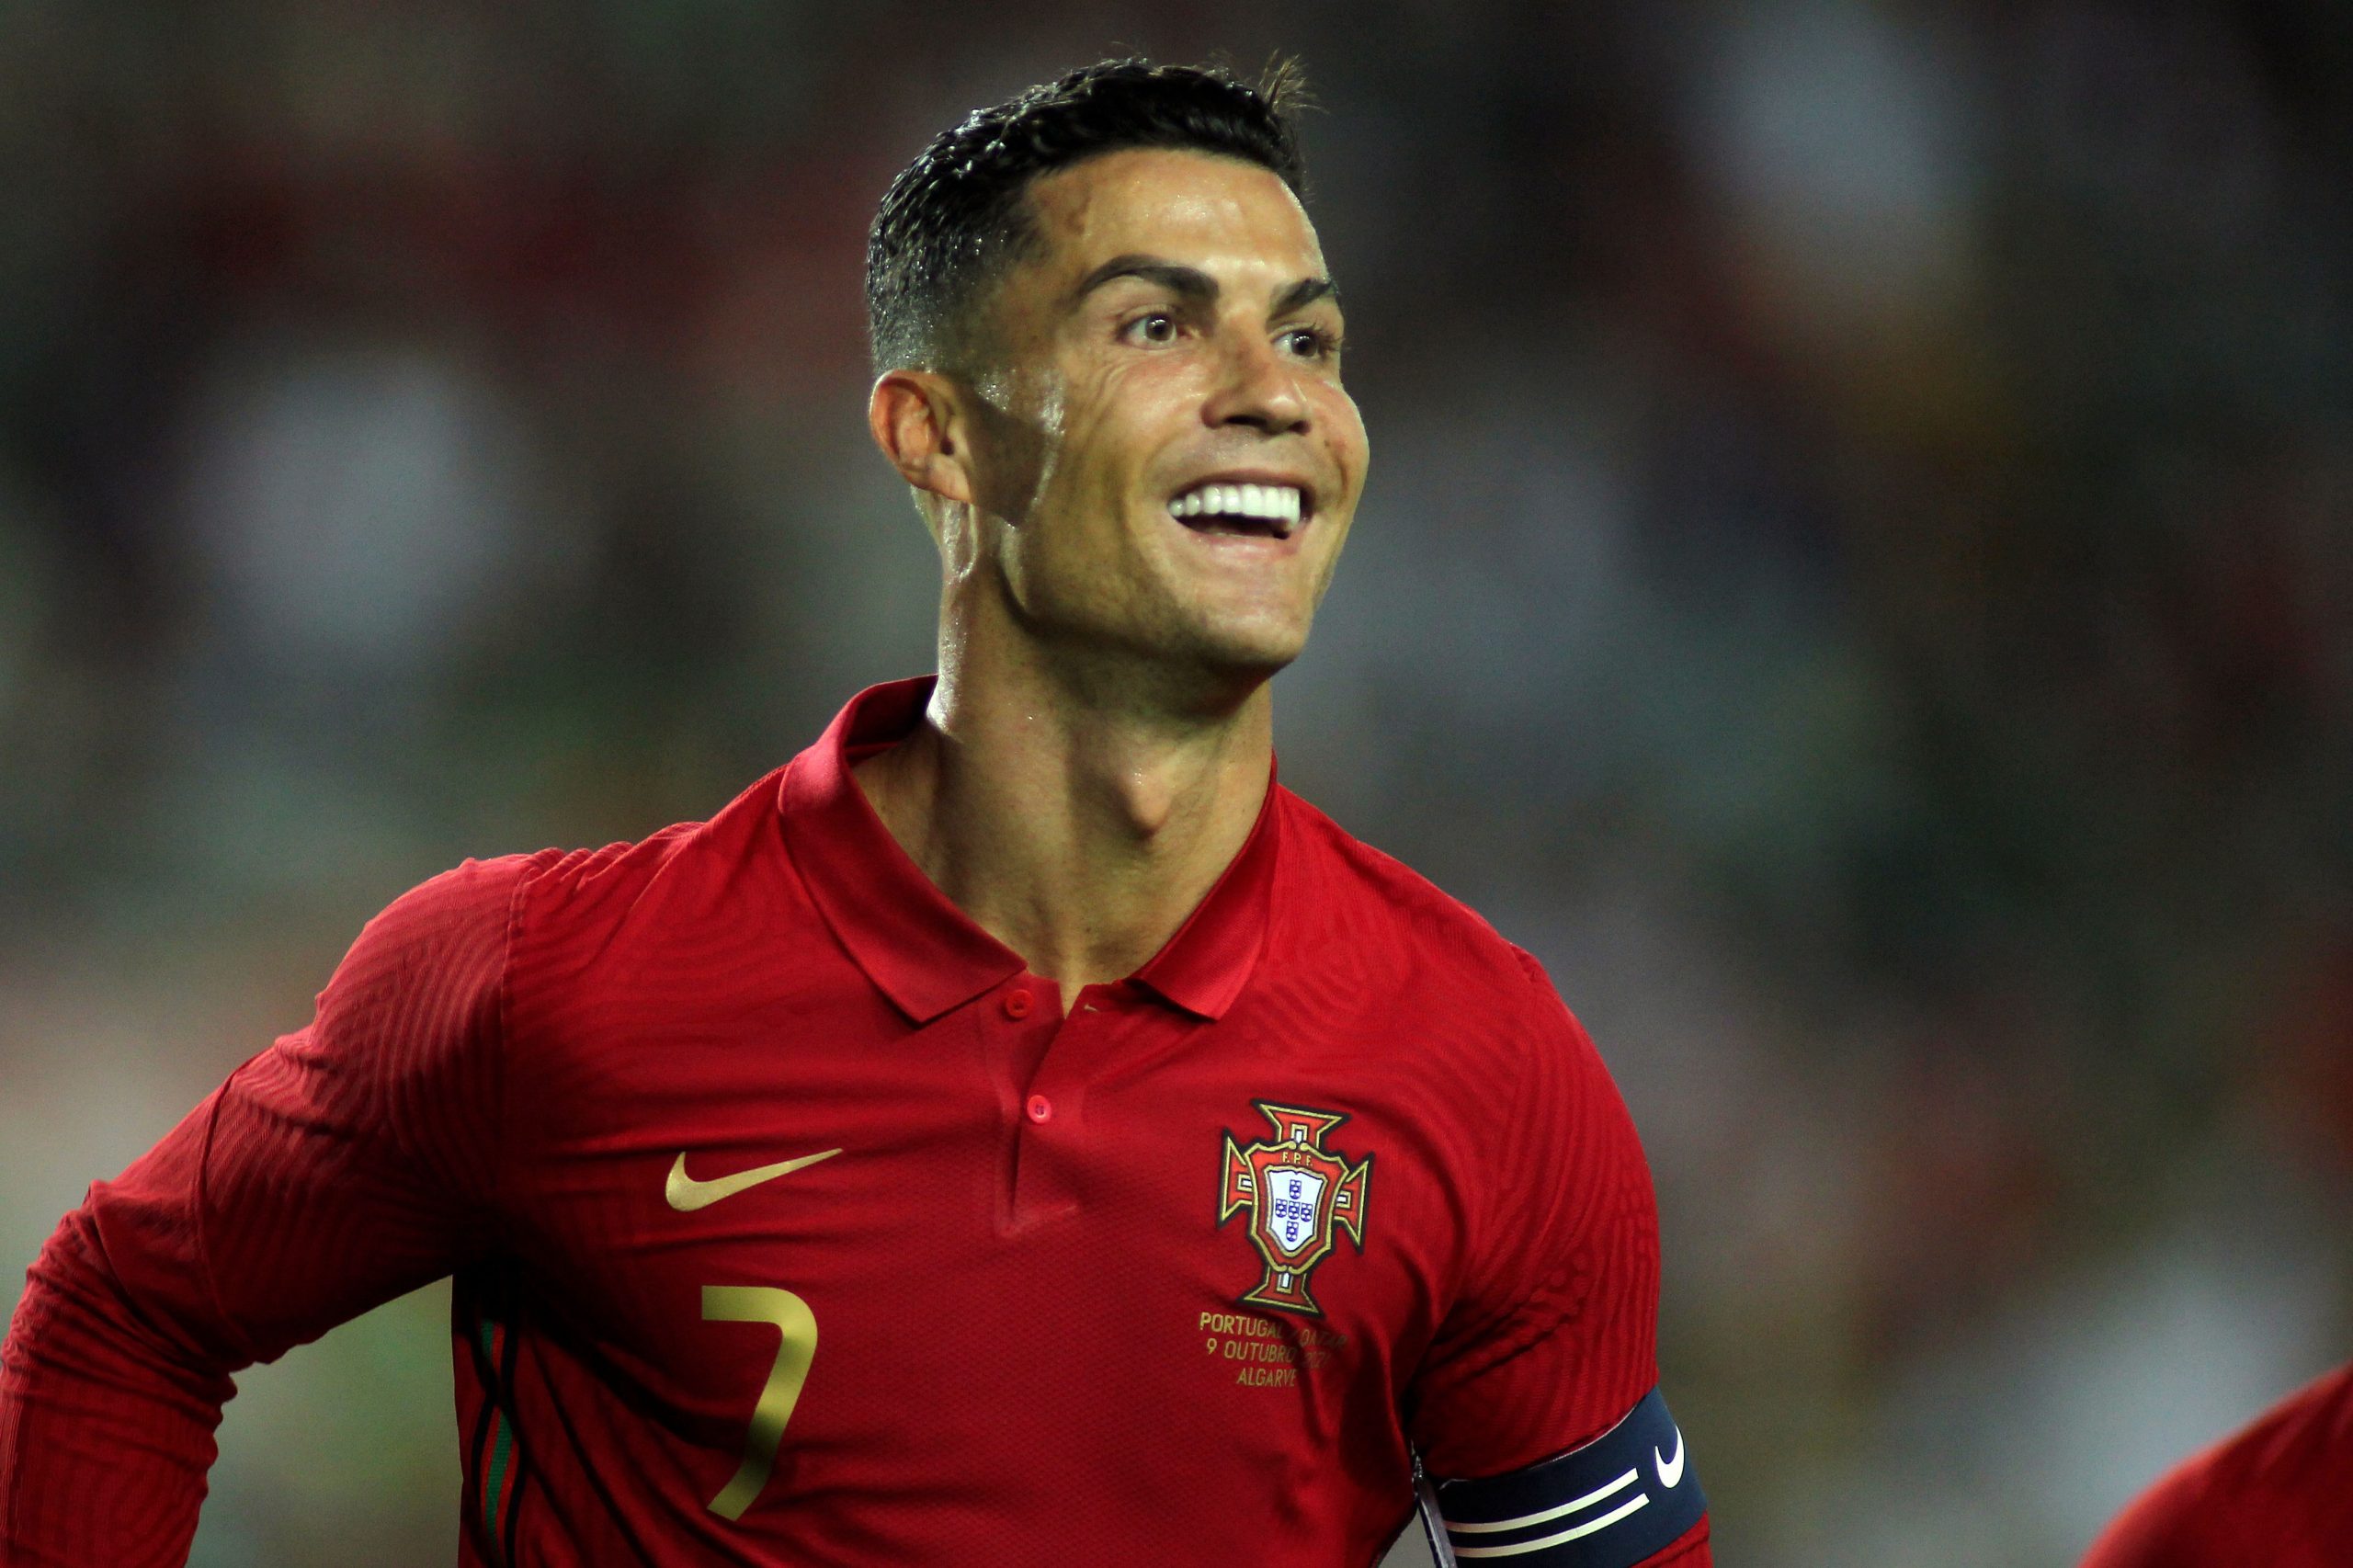 Ronaldo to lead Portugal in Nations League fixture against Czech